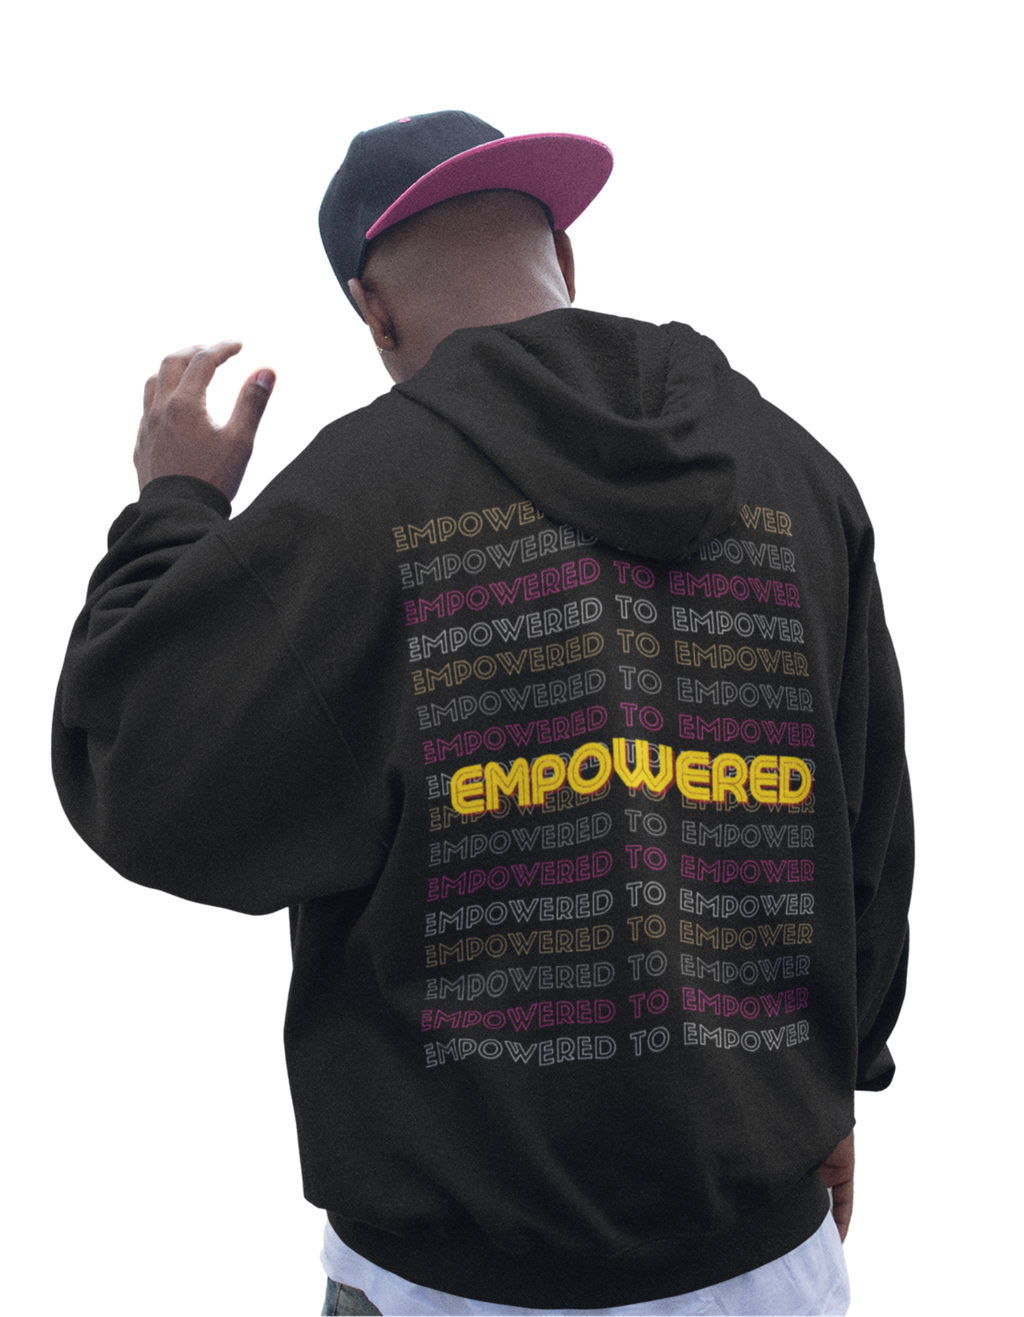 EMPOWERED TO EMPOWER - Unisex Hoodie - In His presence